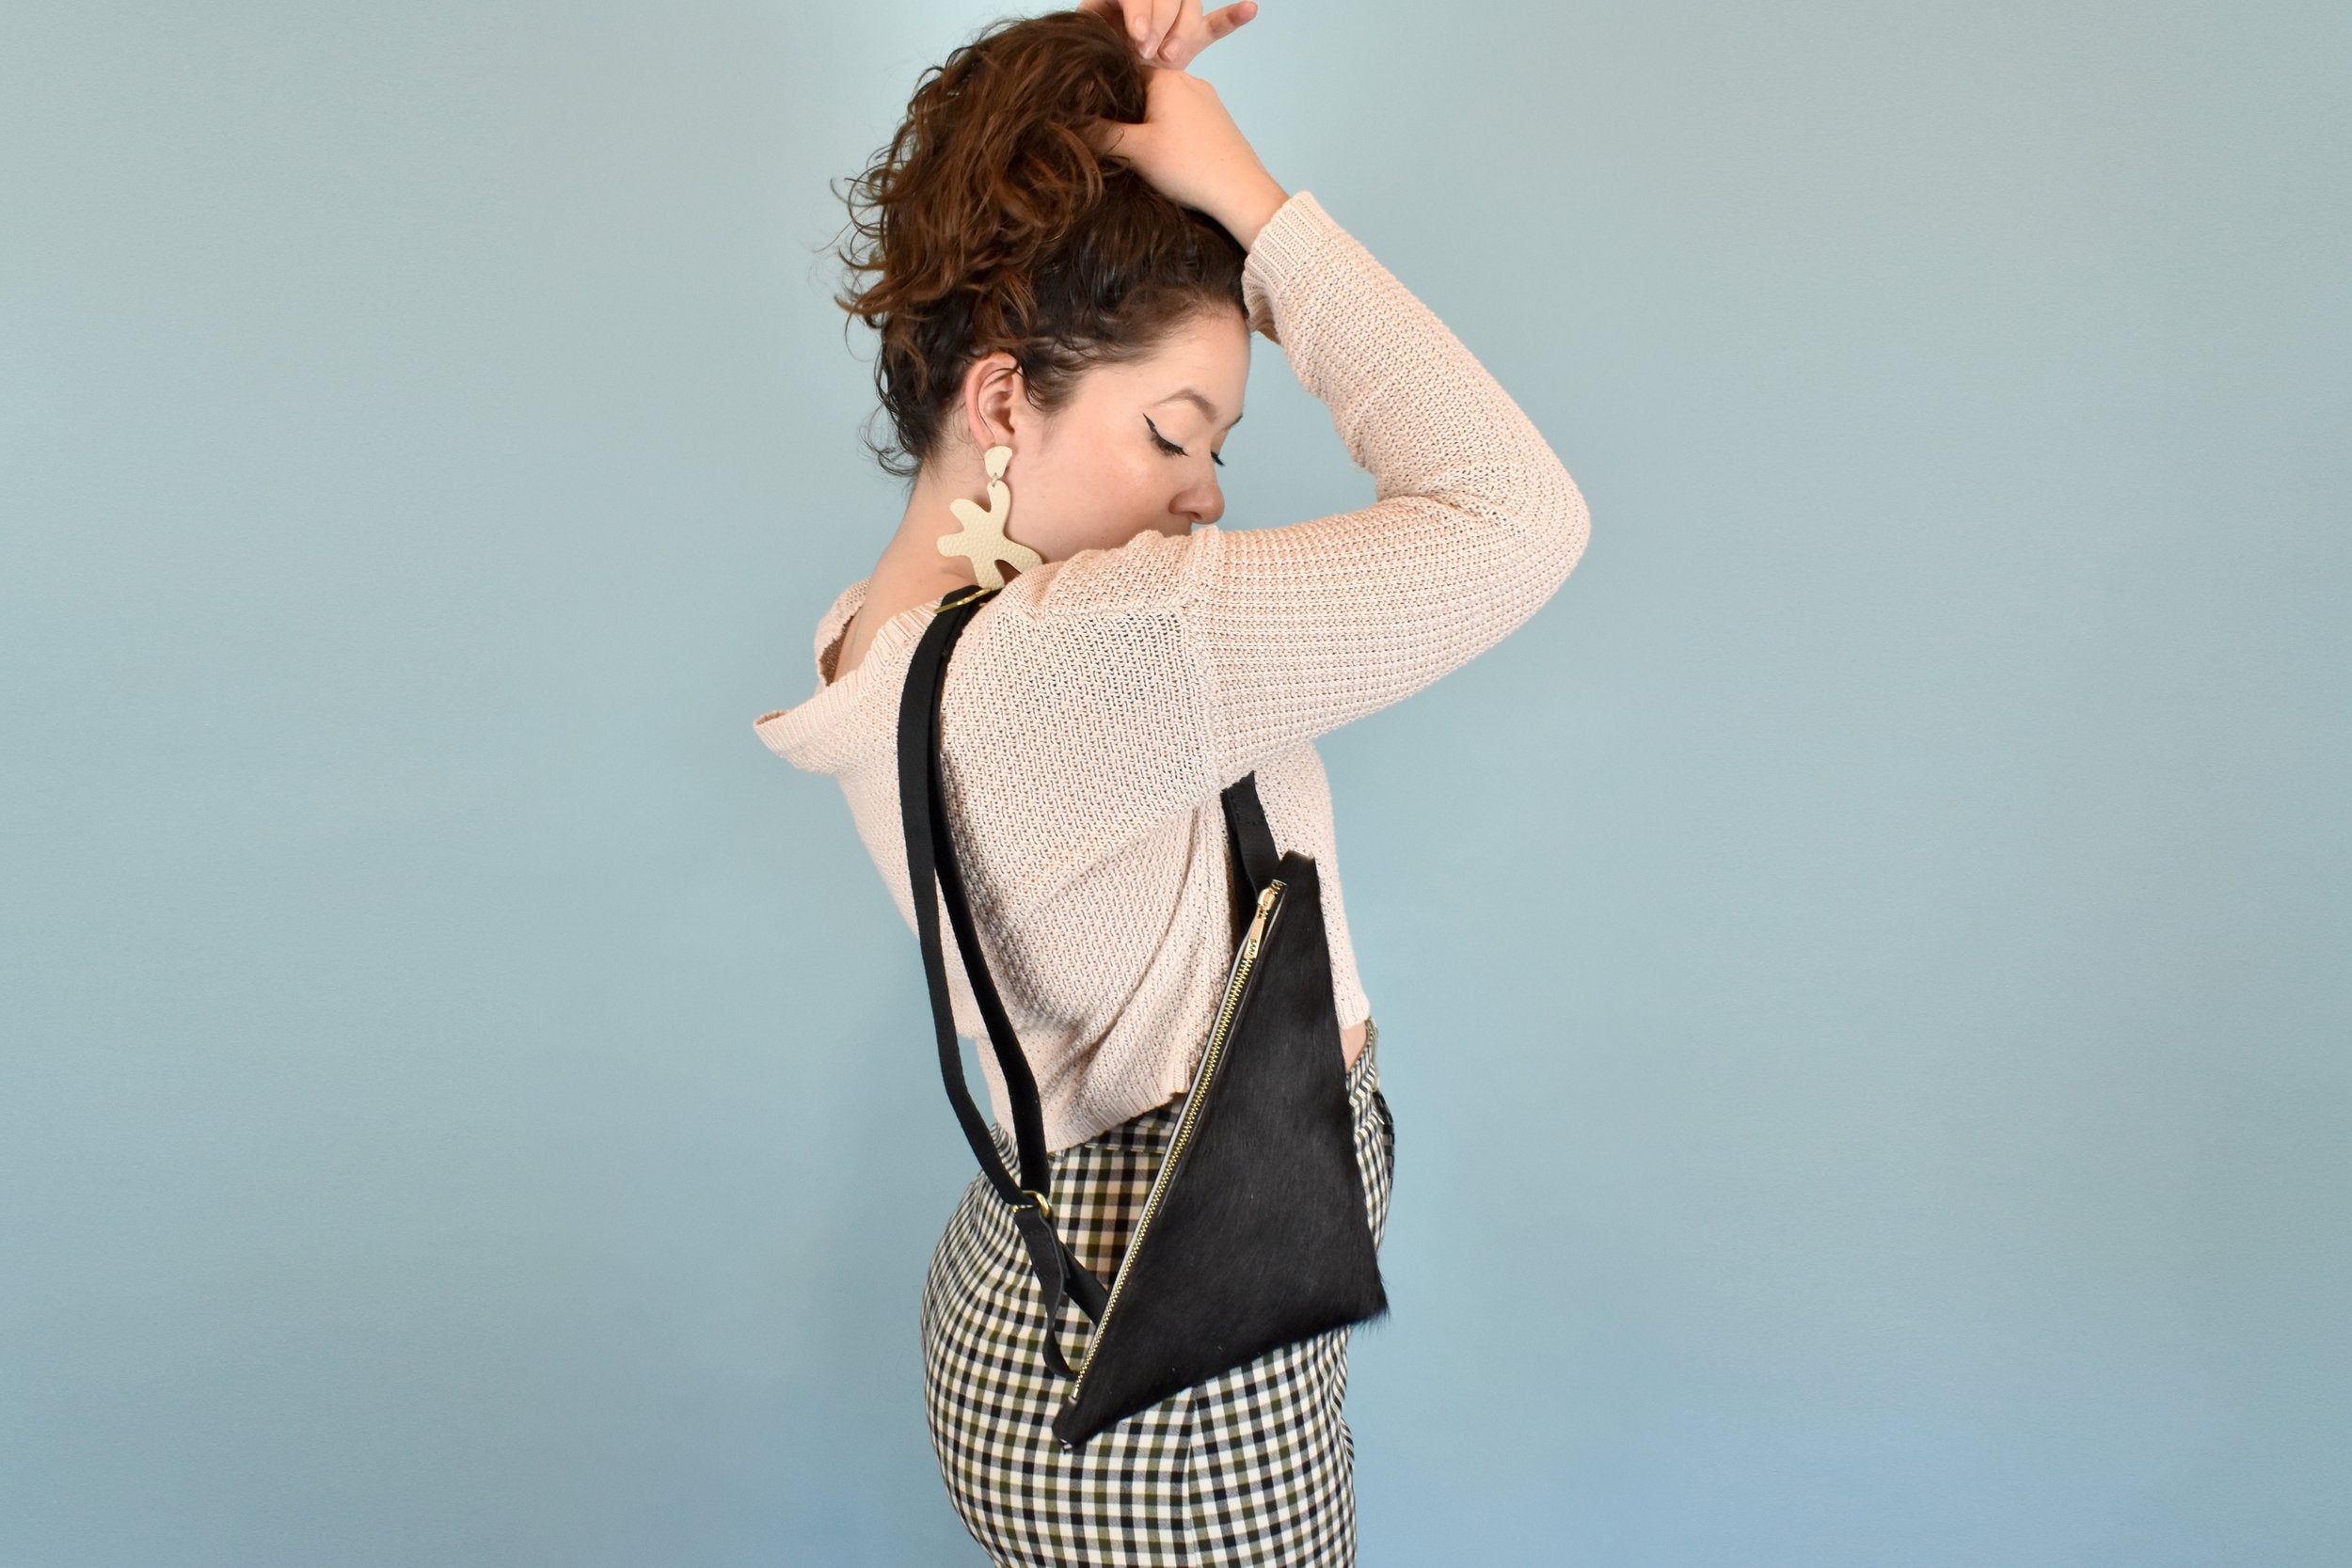 The TriSling: A Leather Crossbody Sling Bag / Wristlet Clutch in Black and White Hair-On-Hide Leather